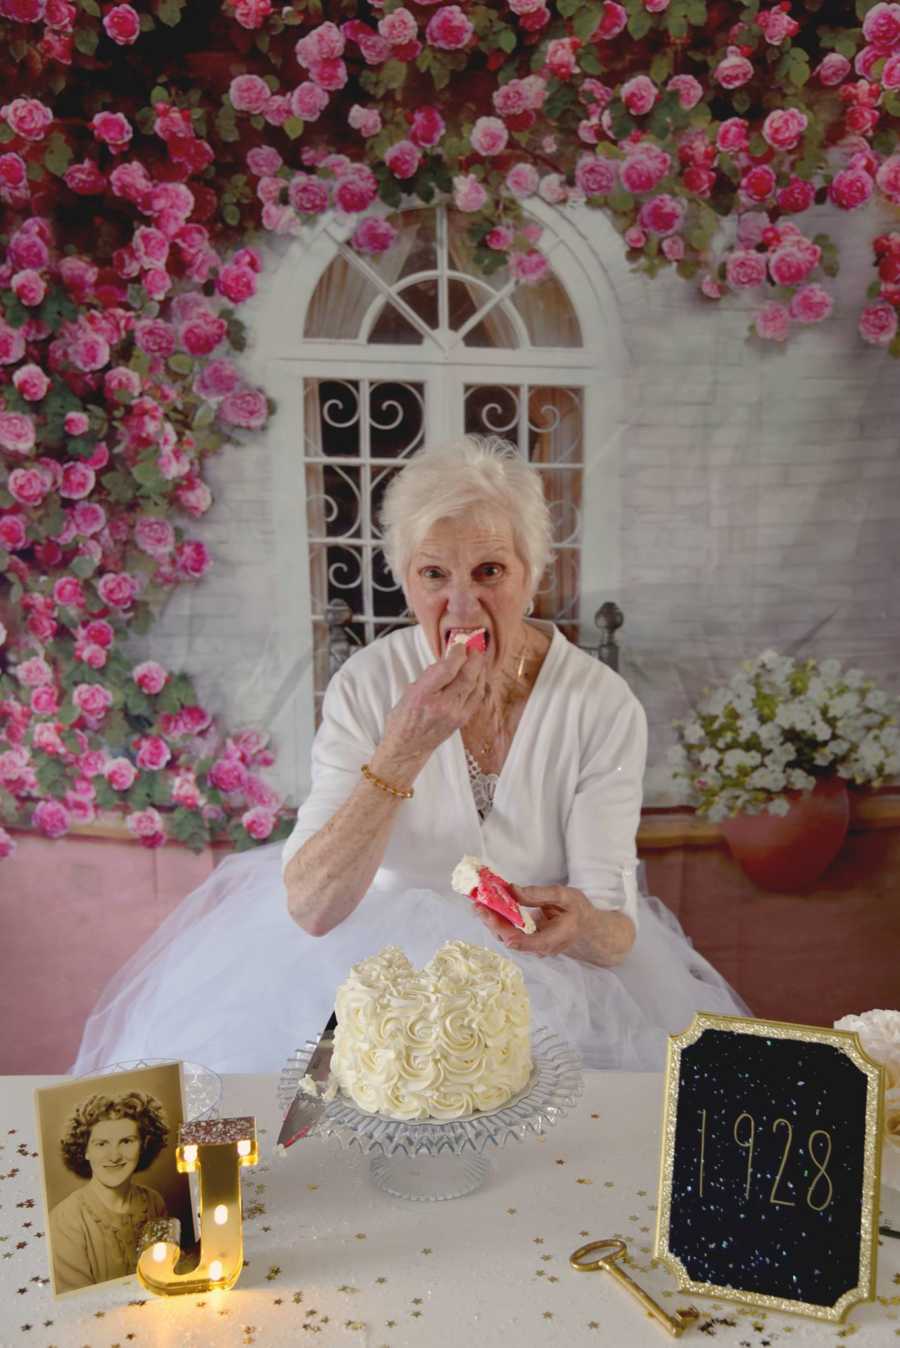 90 year old woman takes bite of birthday cake with her hands